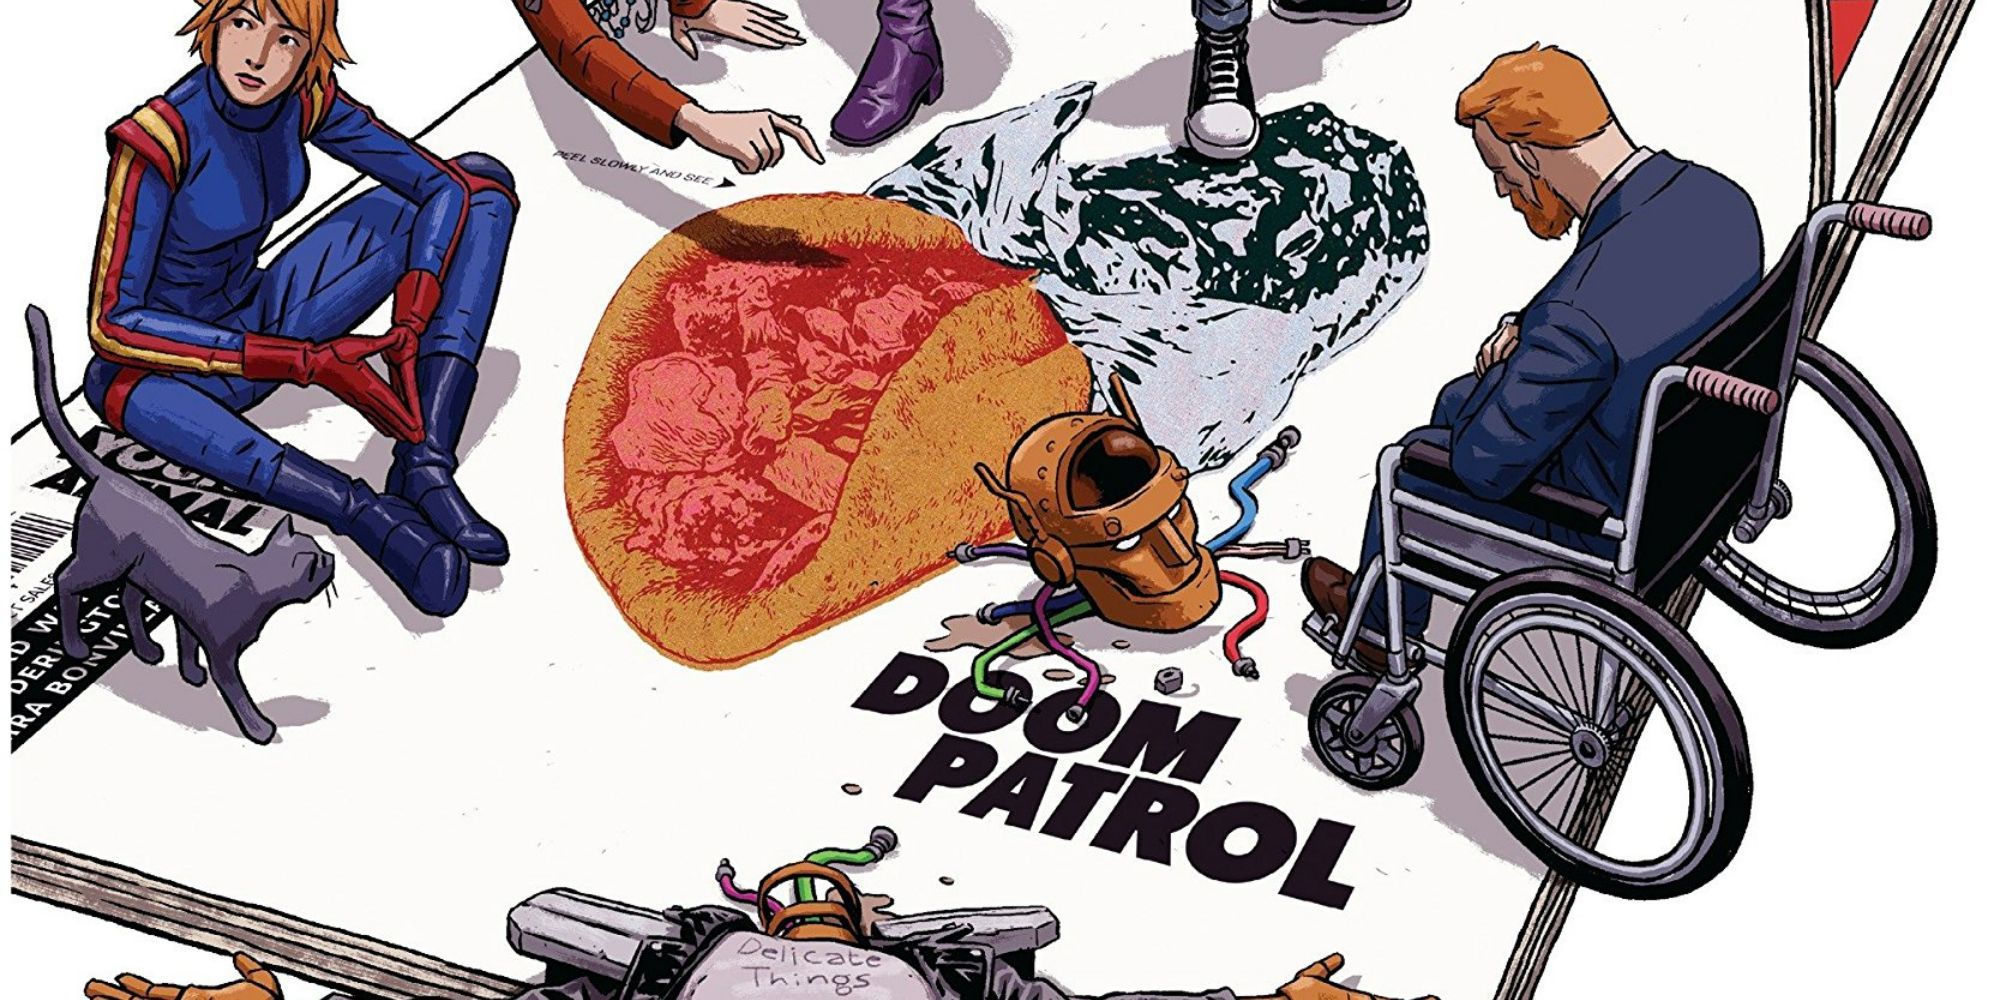 Cover of Doom Patrol - Brick by Brick featuring the team